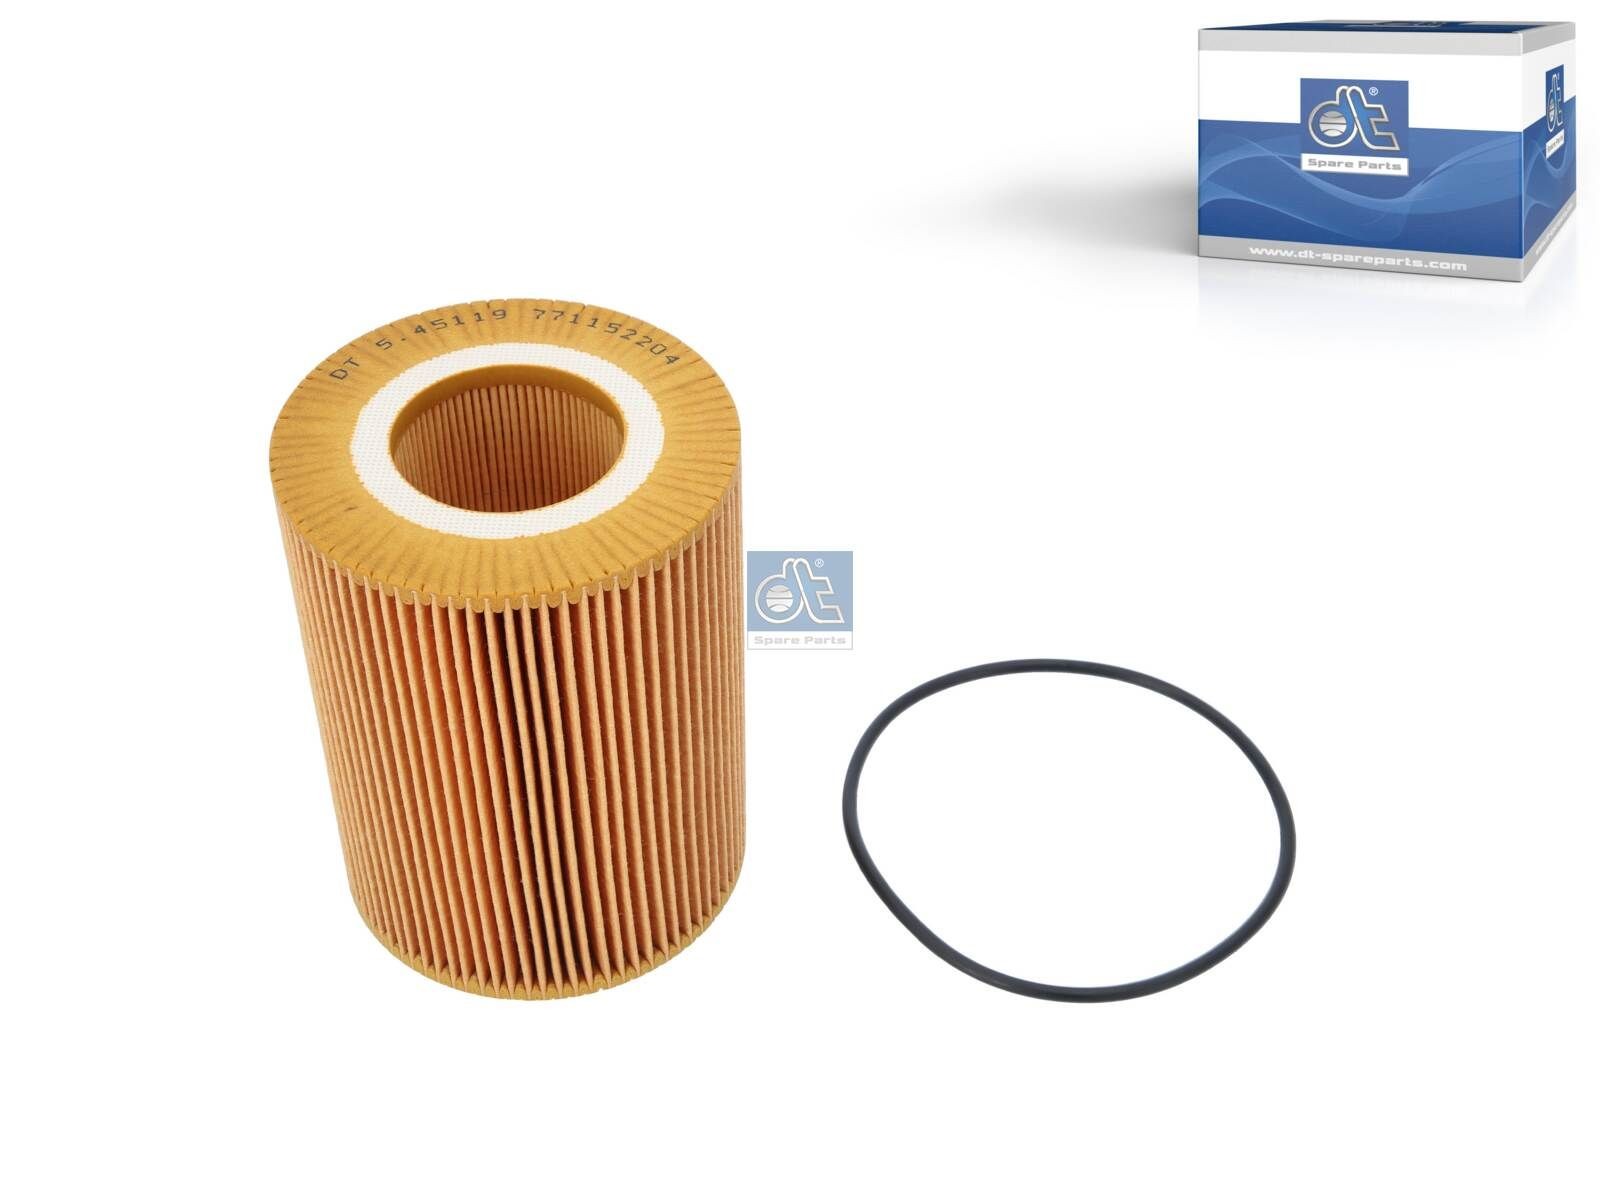 HU 1270 x DT Spare Parts with seal, Filter Insert Oil filters 5.45119 buy